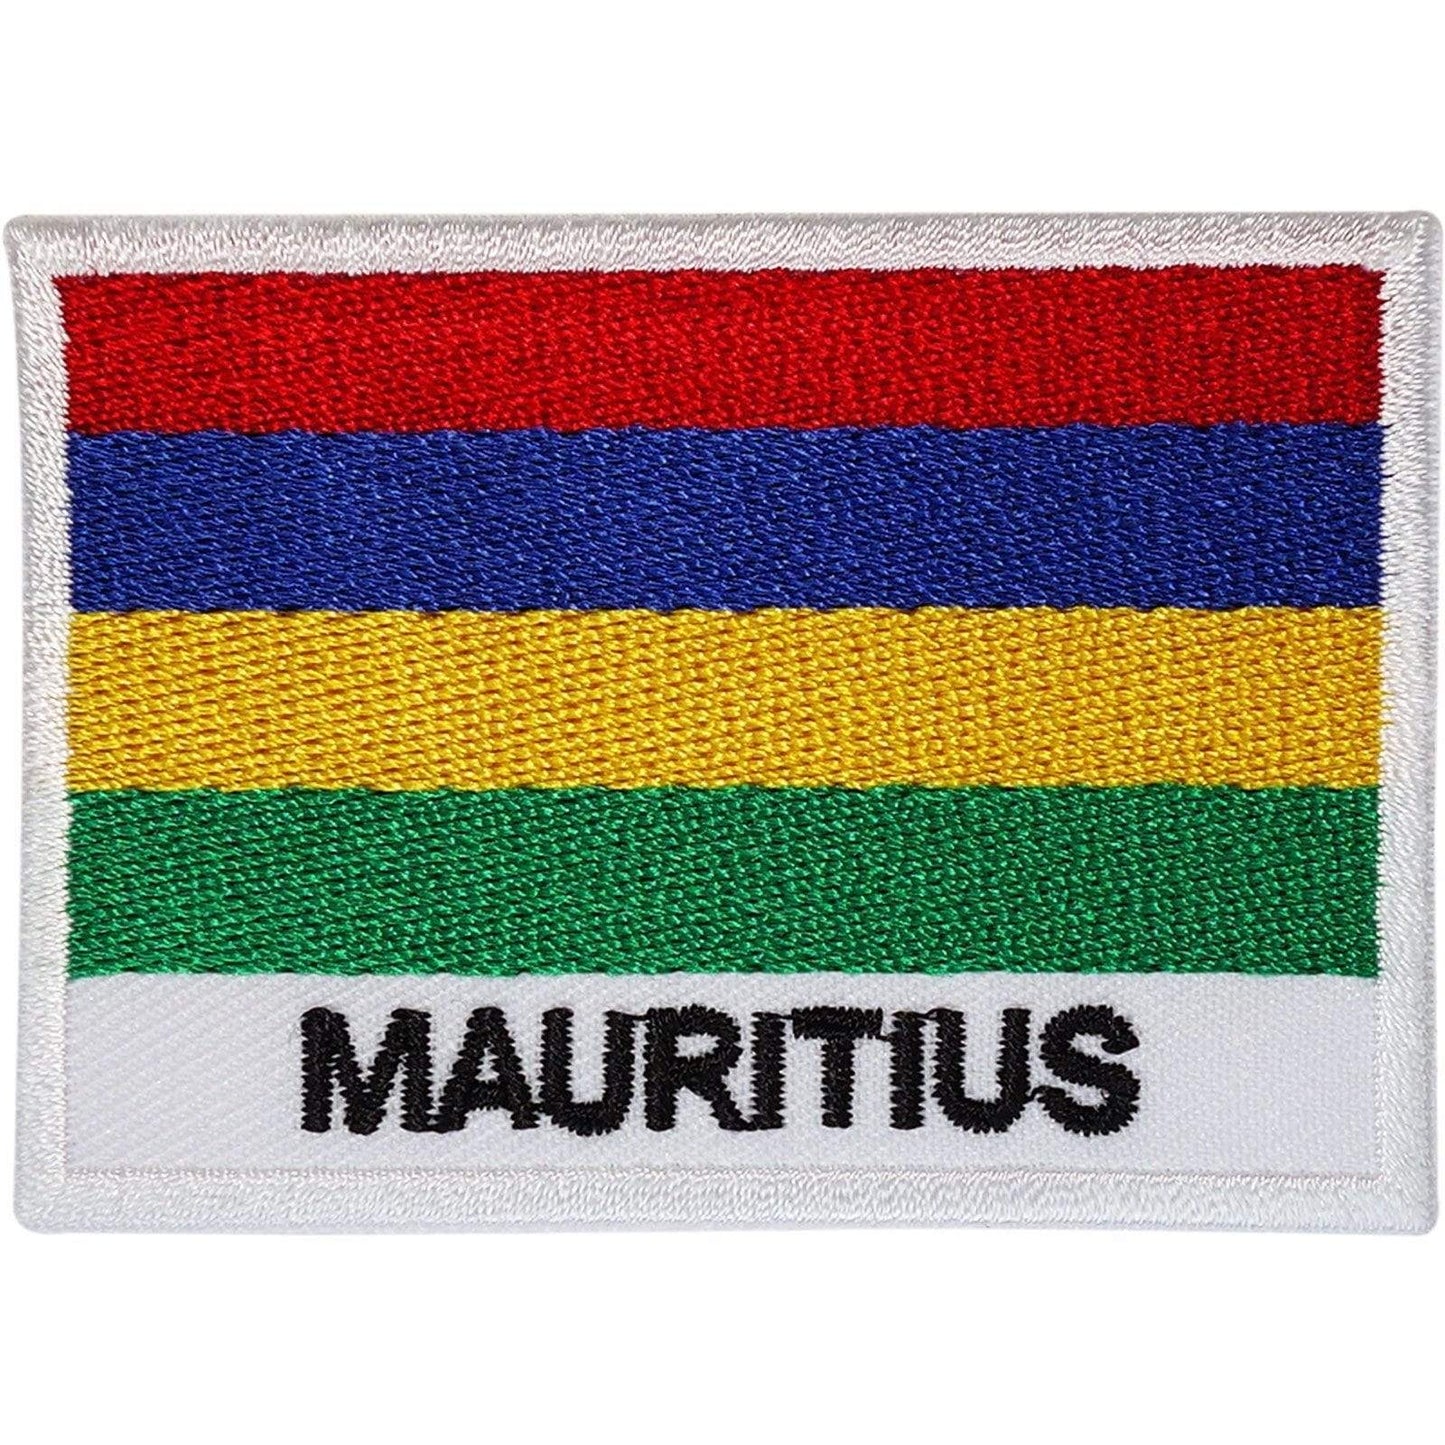 Mauritius Flag Patch Embroidered Badge Iron Sew On Clothes Jeans Hat T Shirt Bag